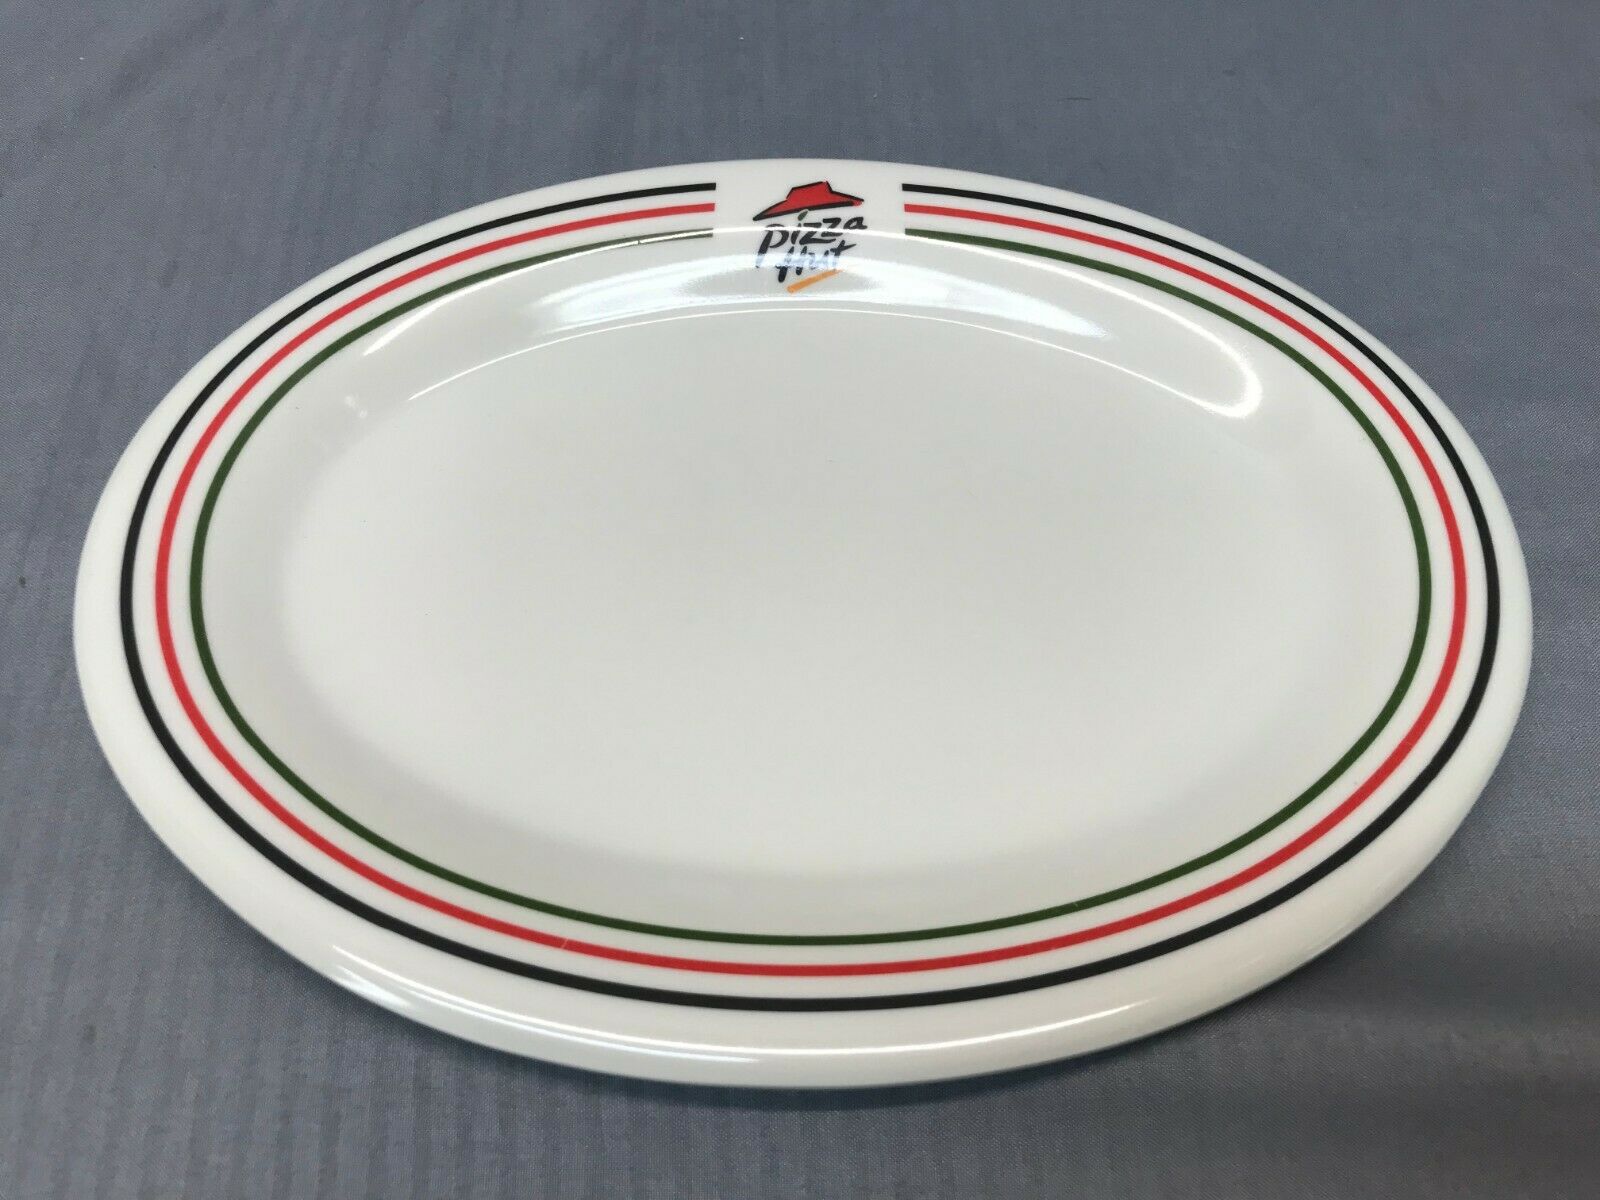 Pizza Hut Restaurant Oval Plate PizzaHut Collectible 1 Oval Plate